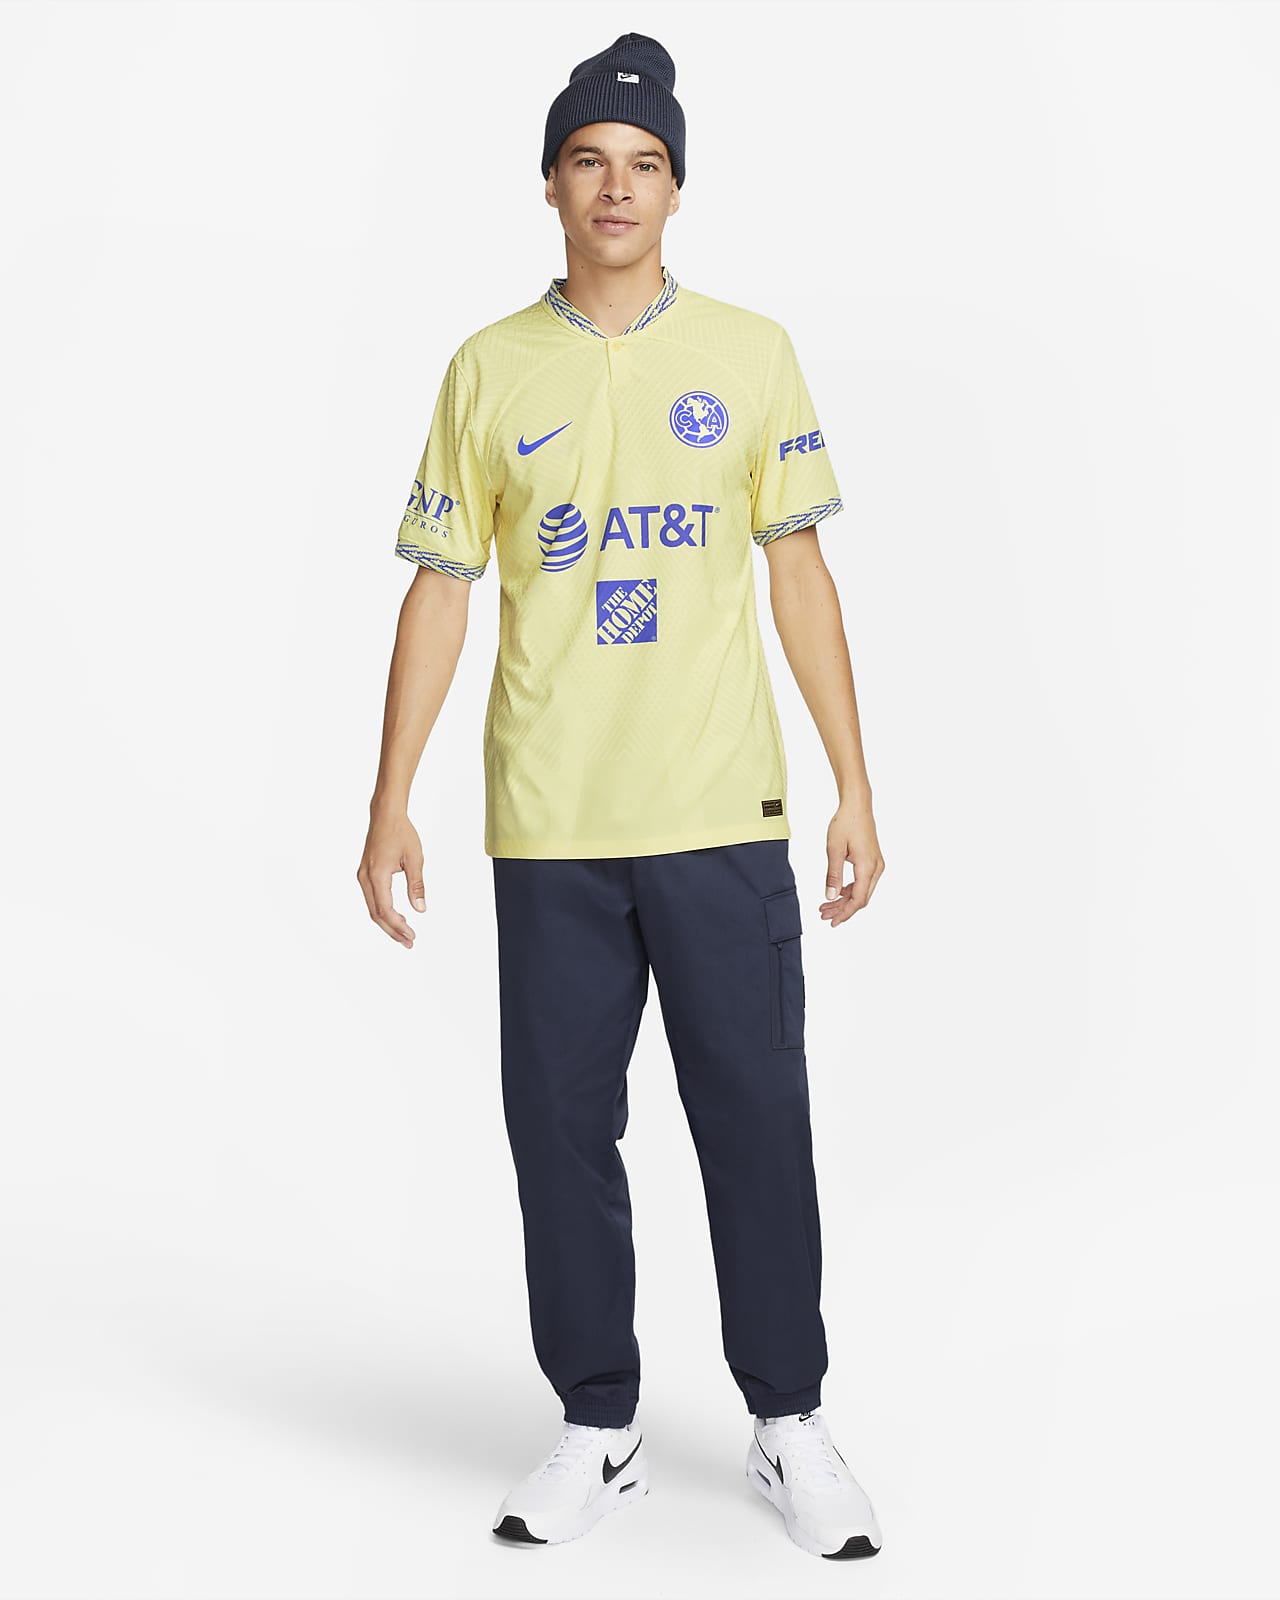 Jersey Club America Nike 2022/23 Home Rodriguez Jersey Club America home  Nike 2022/23 Rodriguez [rod11] - $88.00 : Tienda Futbol Soccer de Mexico,  Futbol Soccer Shirts and Futbol Kits available from .